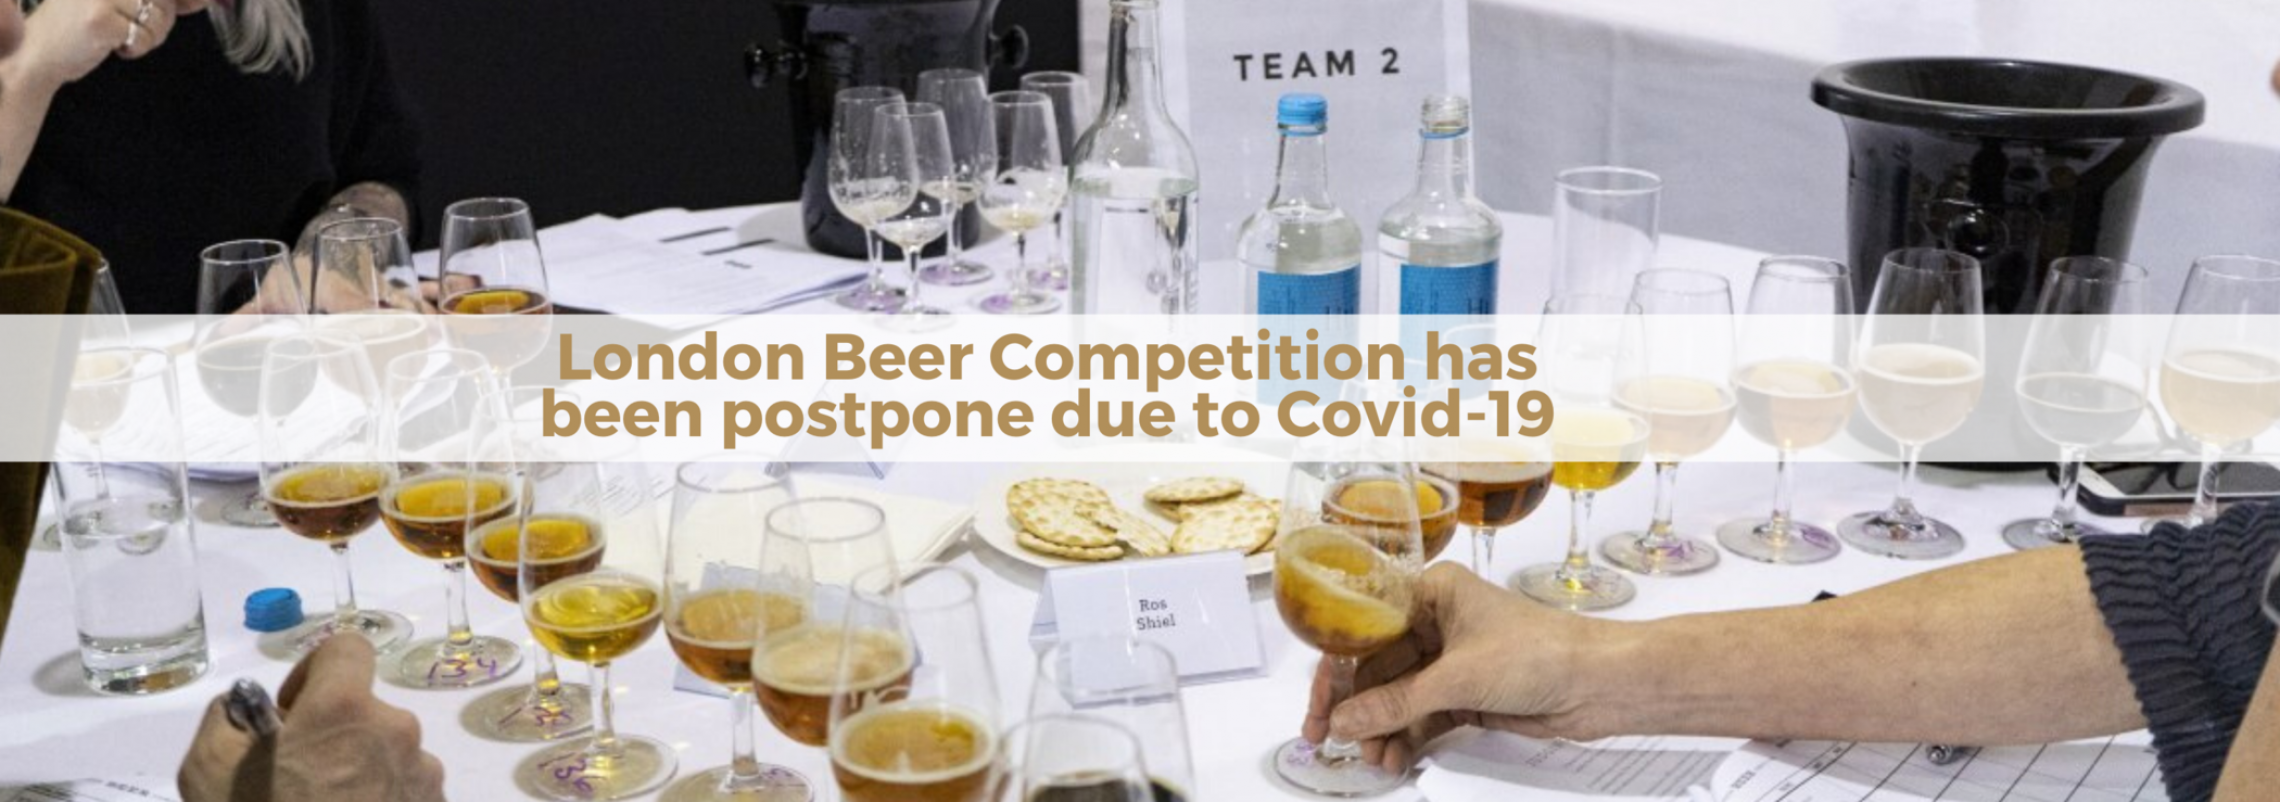 Photo for: London Beer Competition Postponed Over Covid-19